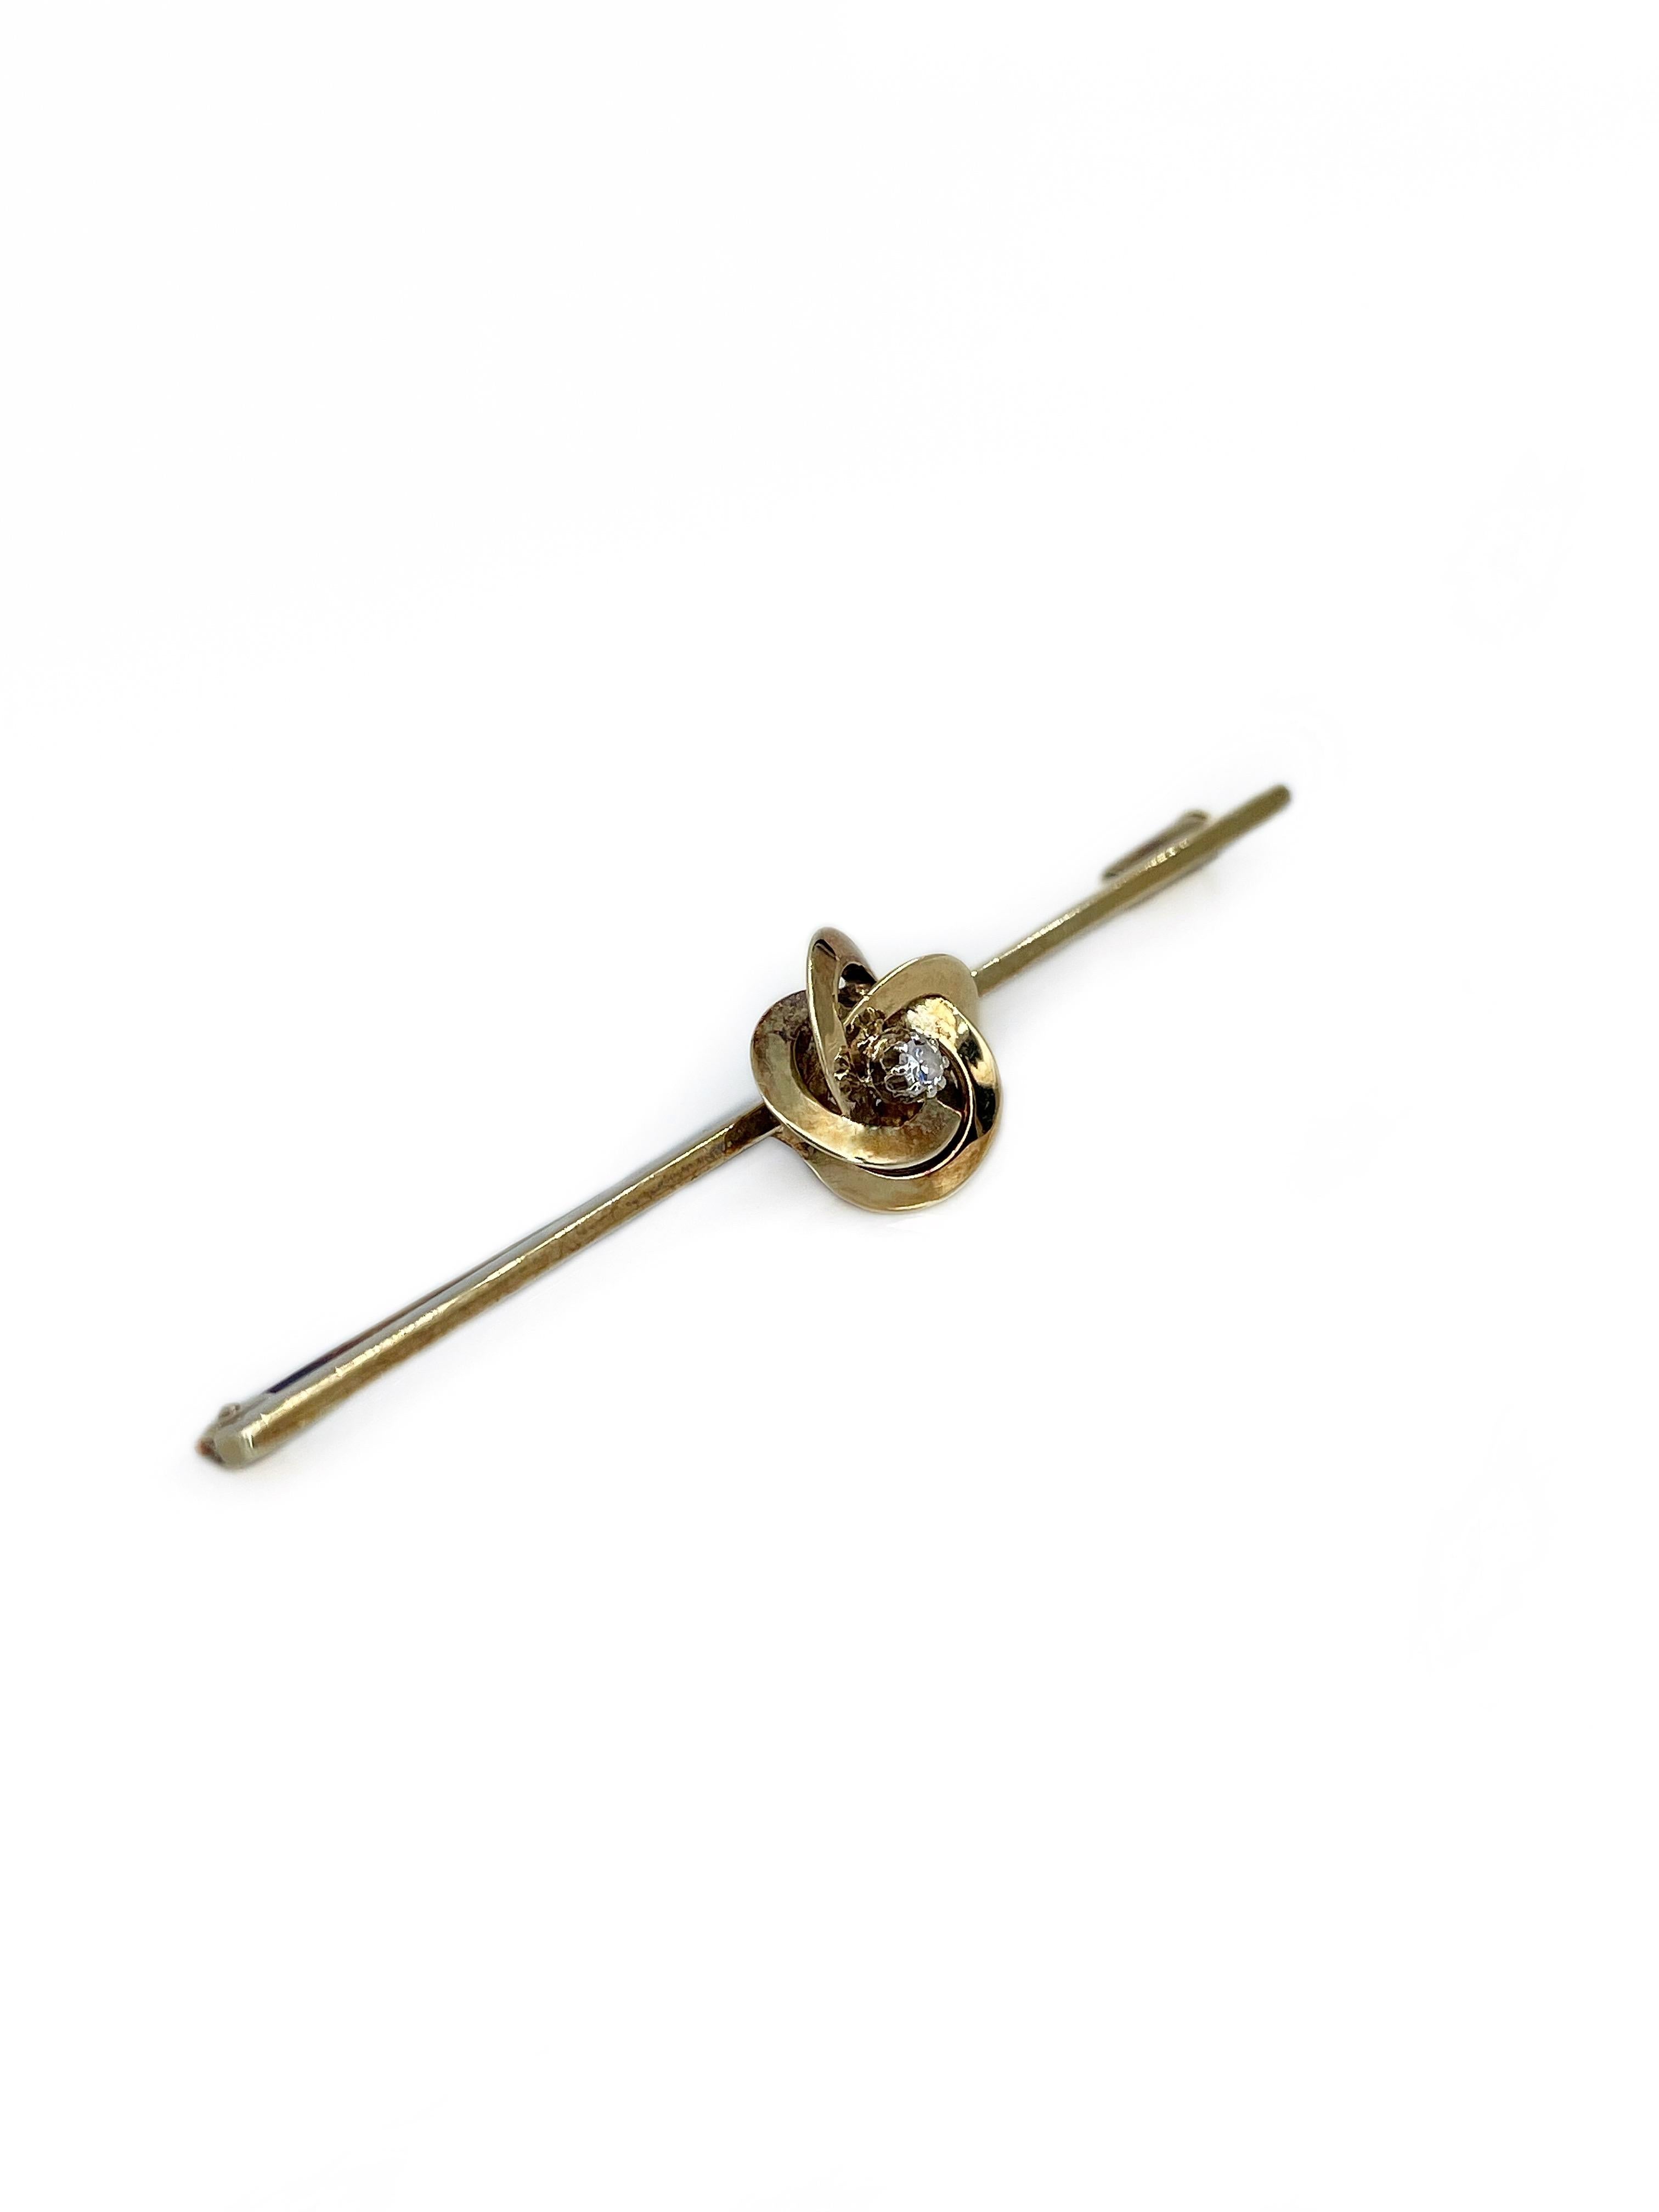 This is a mid century love knot bar brooch crafted in 14K yellow gold. Circa 1950. The piece features 1 round cut diamond (RBC-17, 0.03ct, RW-W, SI).

Signed: 585

Weight: 4.76g
Length: 6cm
Knot diameter: 1.2cm

———

If you have any questions,